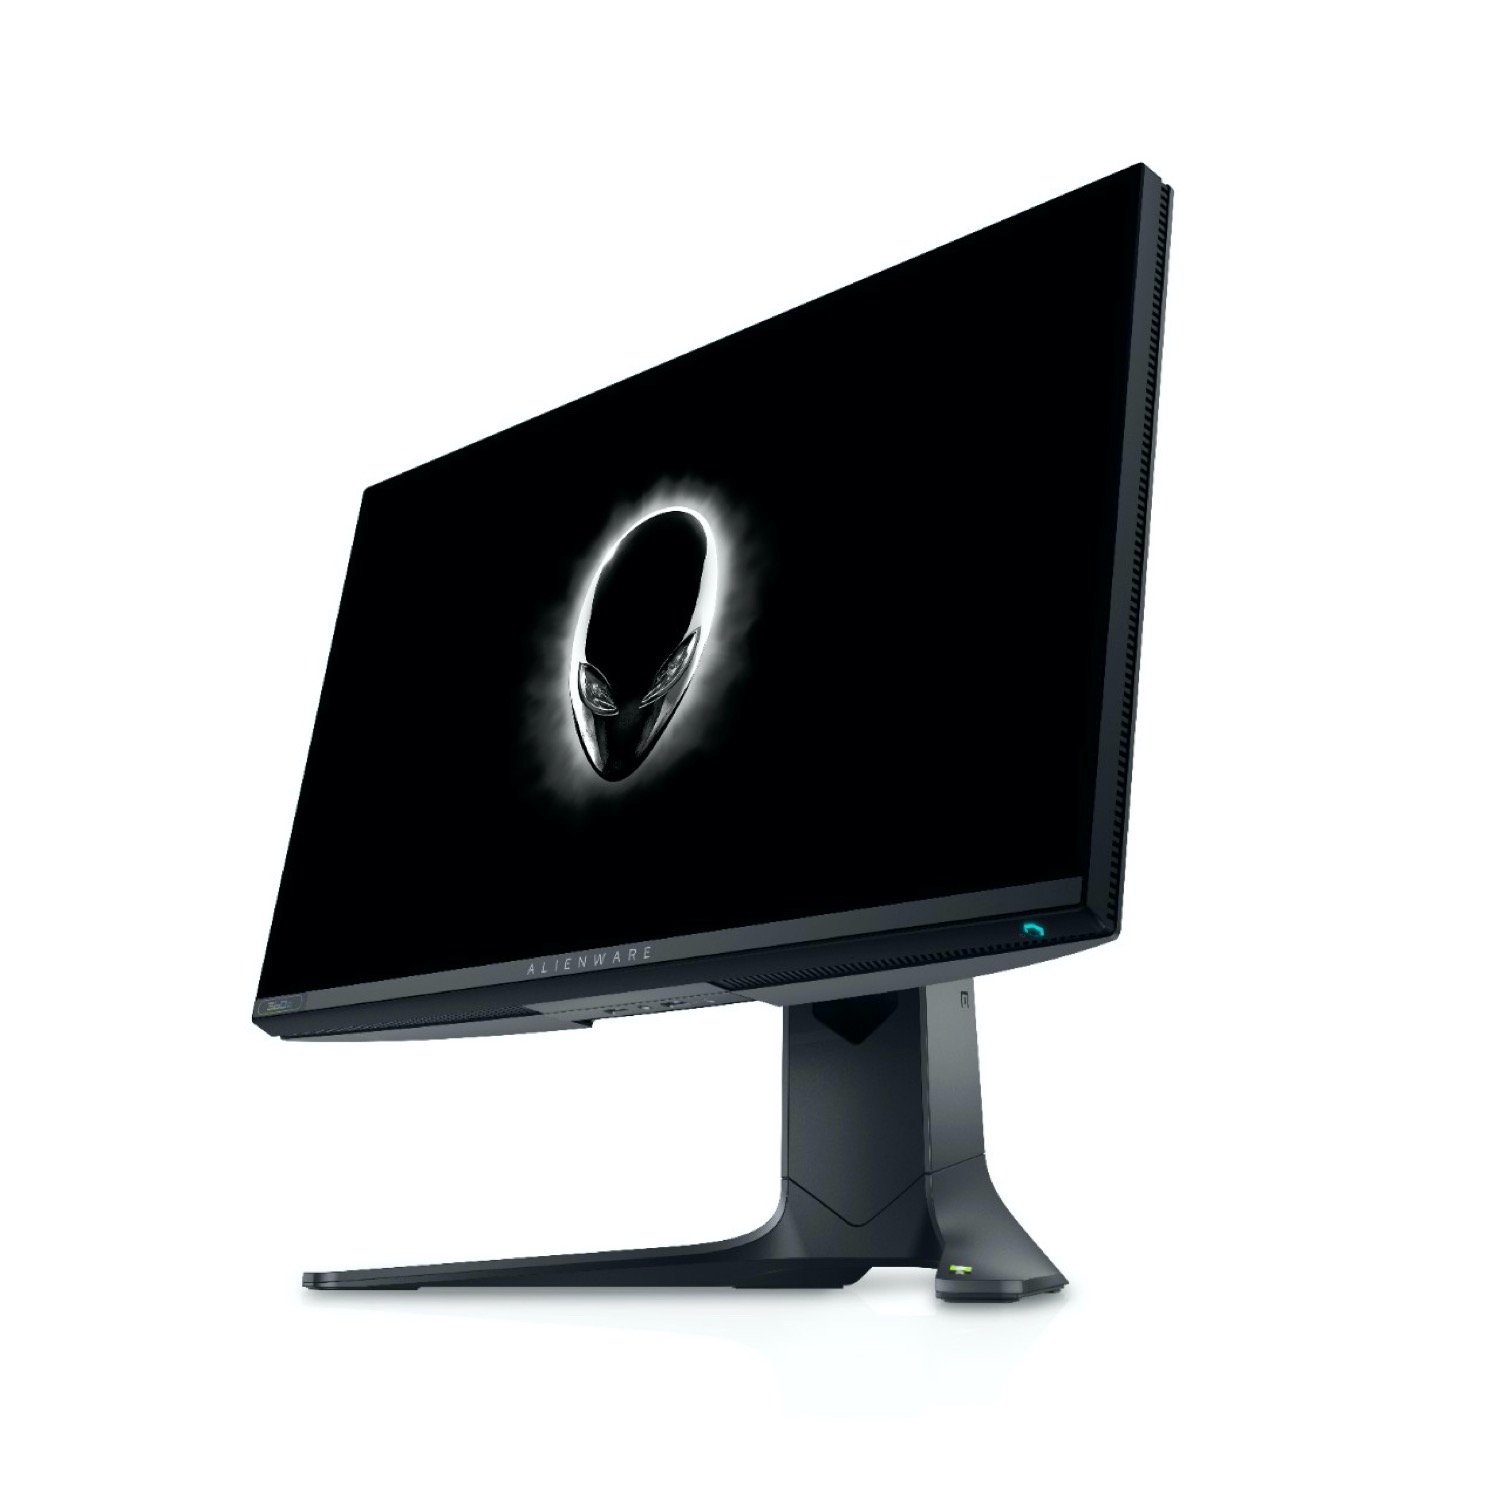 Alienware introduces 25-in 360 Hz monitor with AMD FreeSync and NVIDIA  G-Sync: 1080p IPS panel with 99 percent sRGB competes with ASUS ROG Swift  360 for the Fortnite and Overwatch eSports crowd 